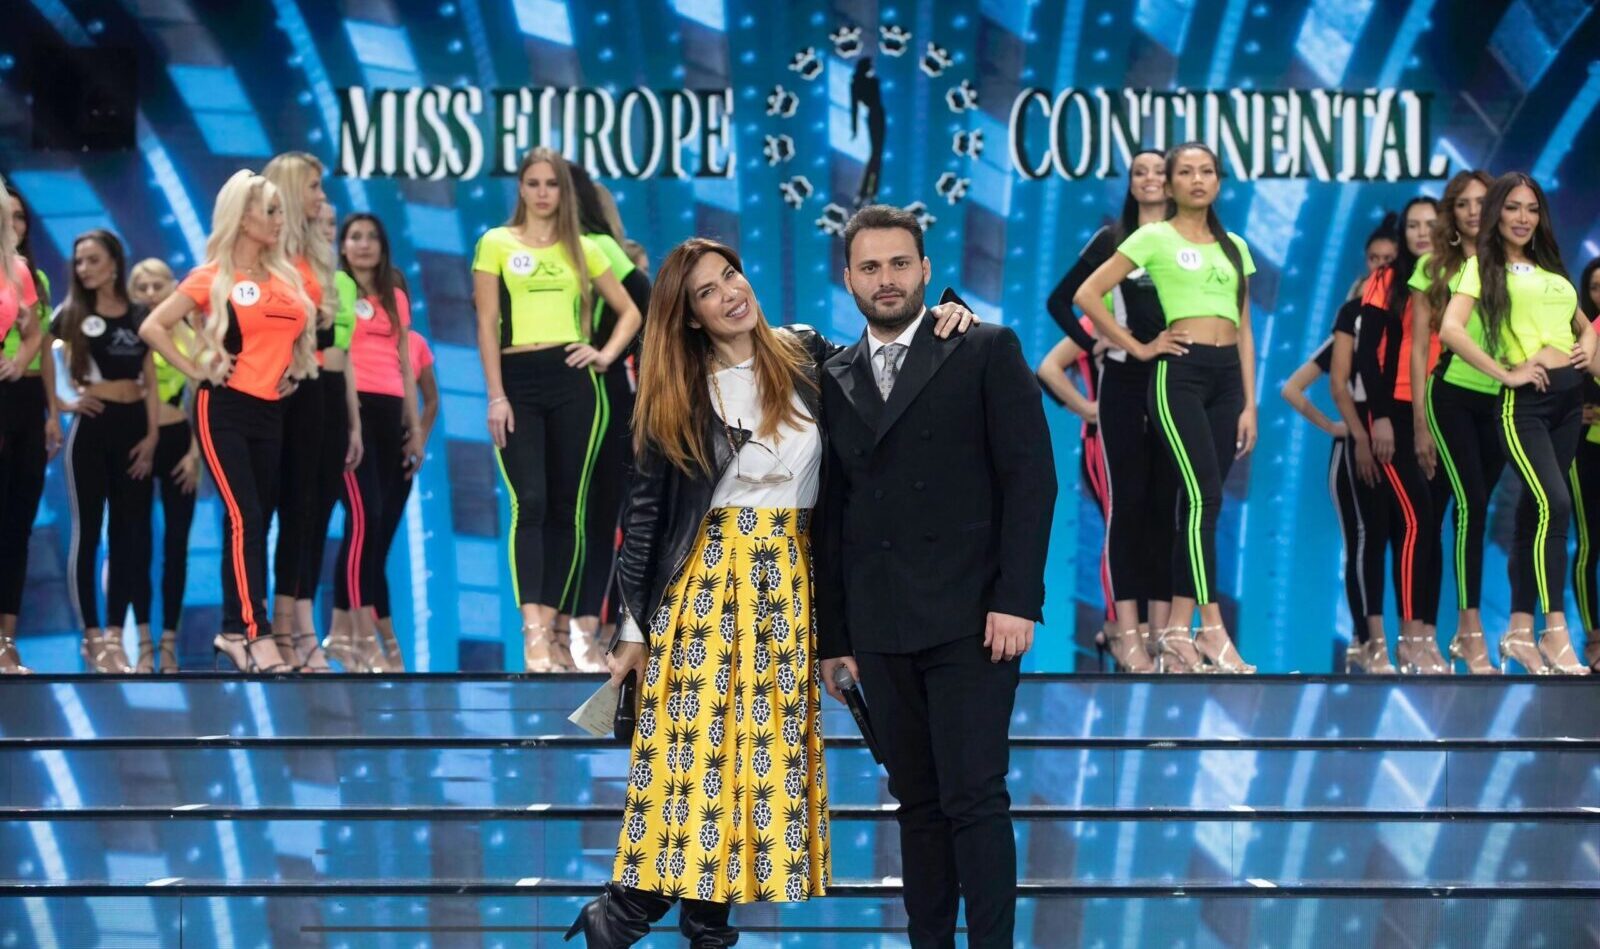 miss europe continental a Napoli